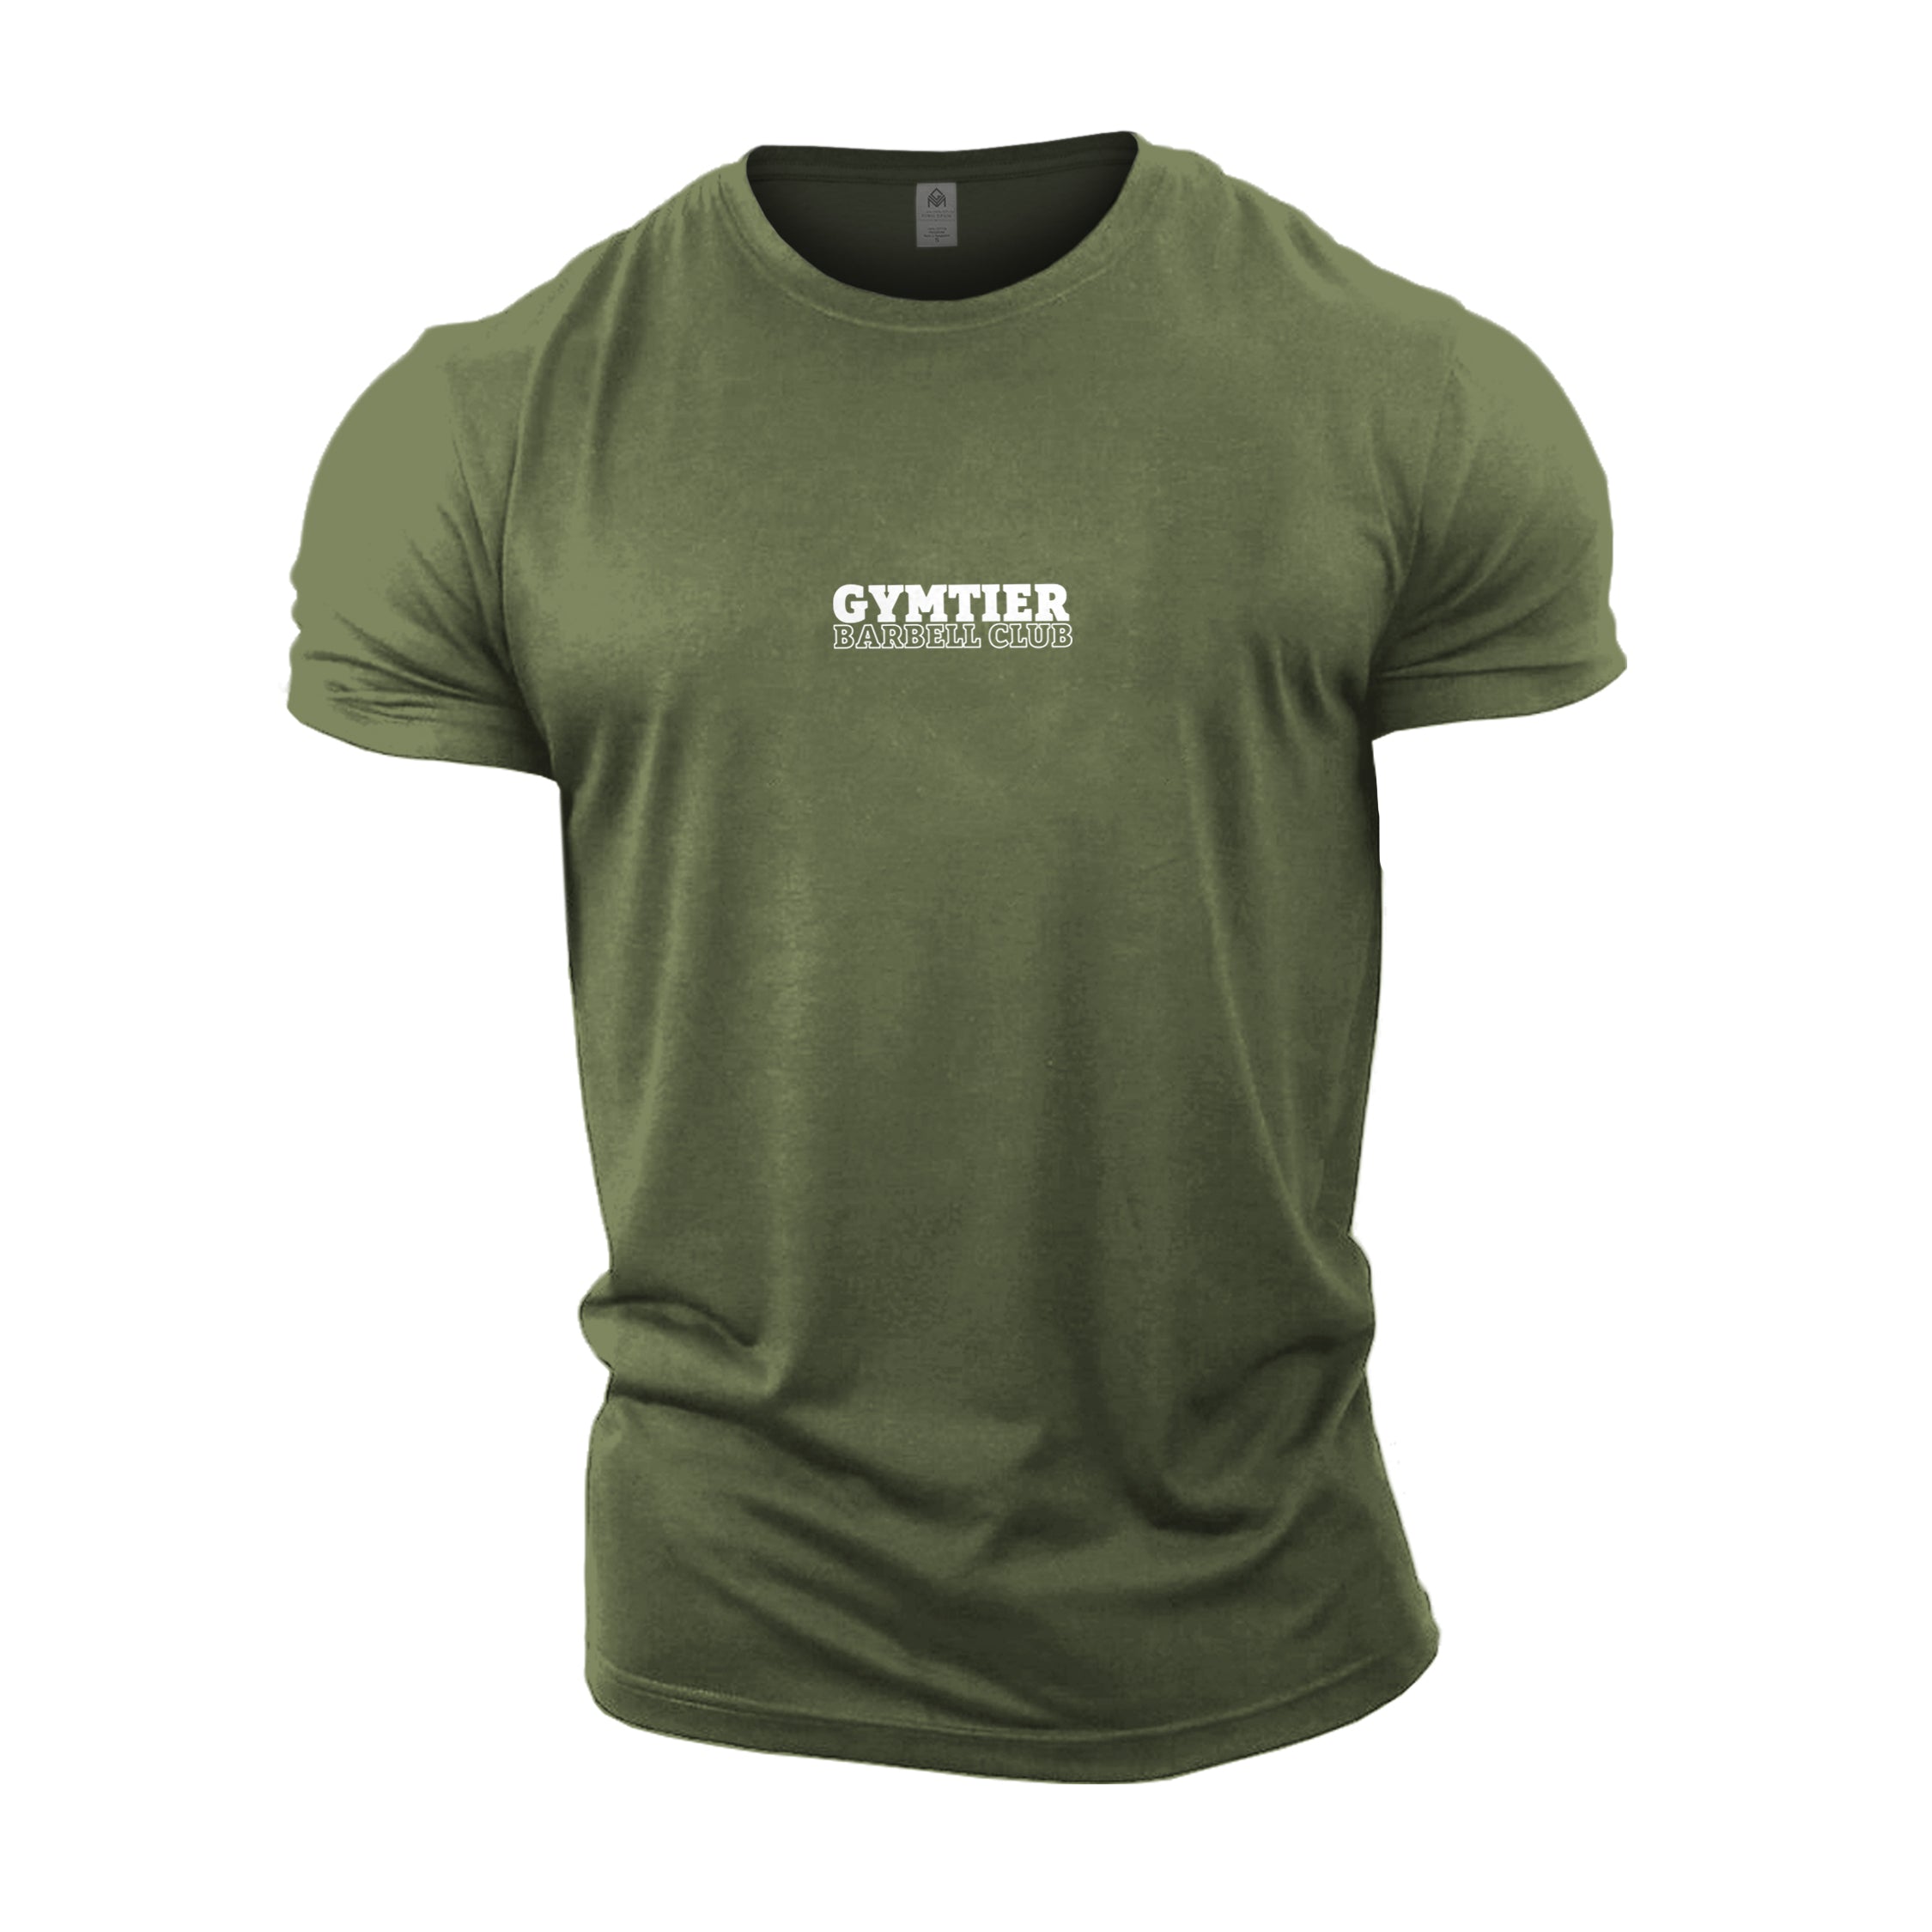 Gymtier Barbell Club - Live To Train - Gym T-Shirt